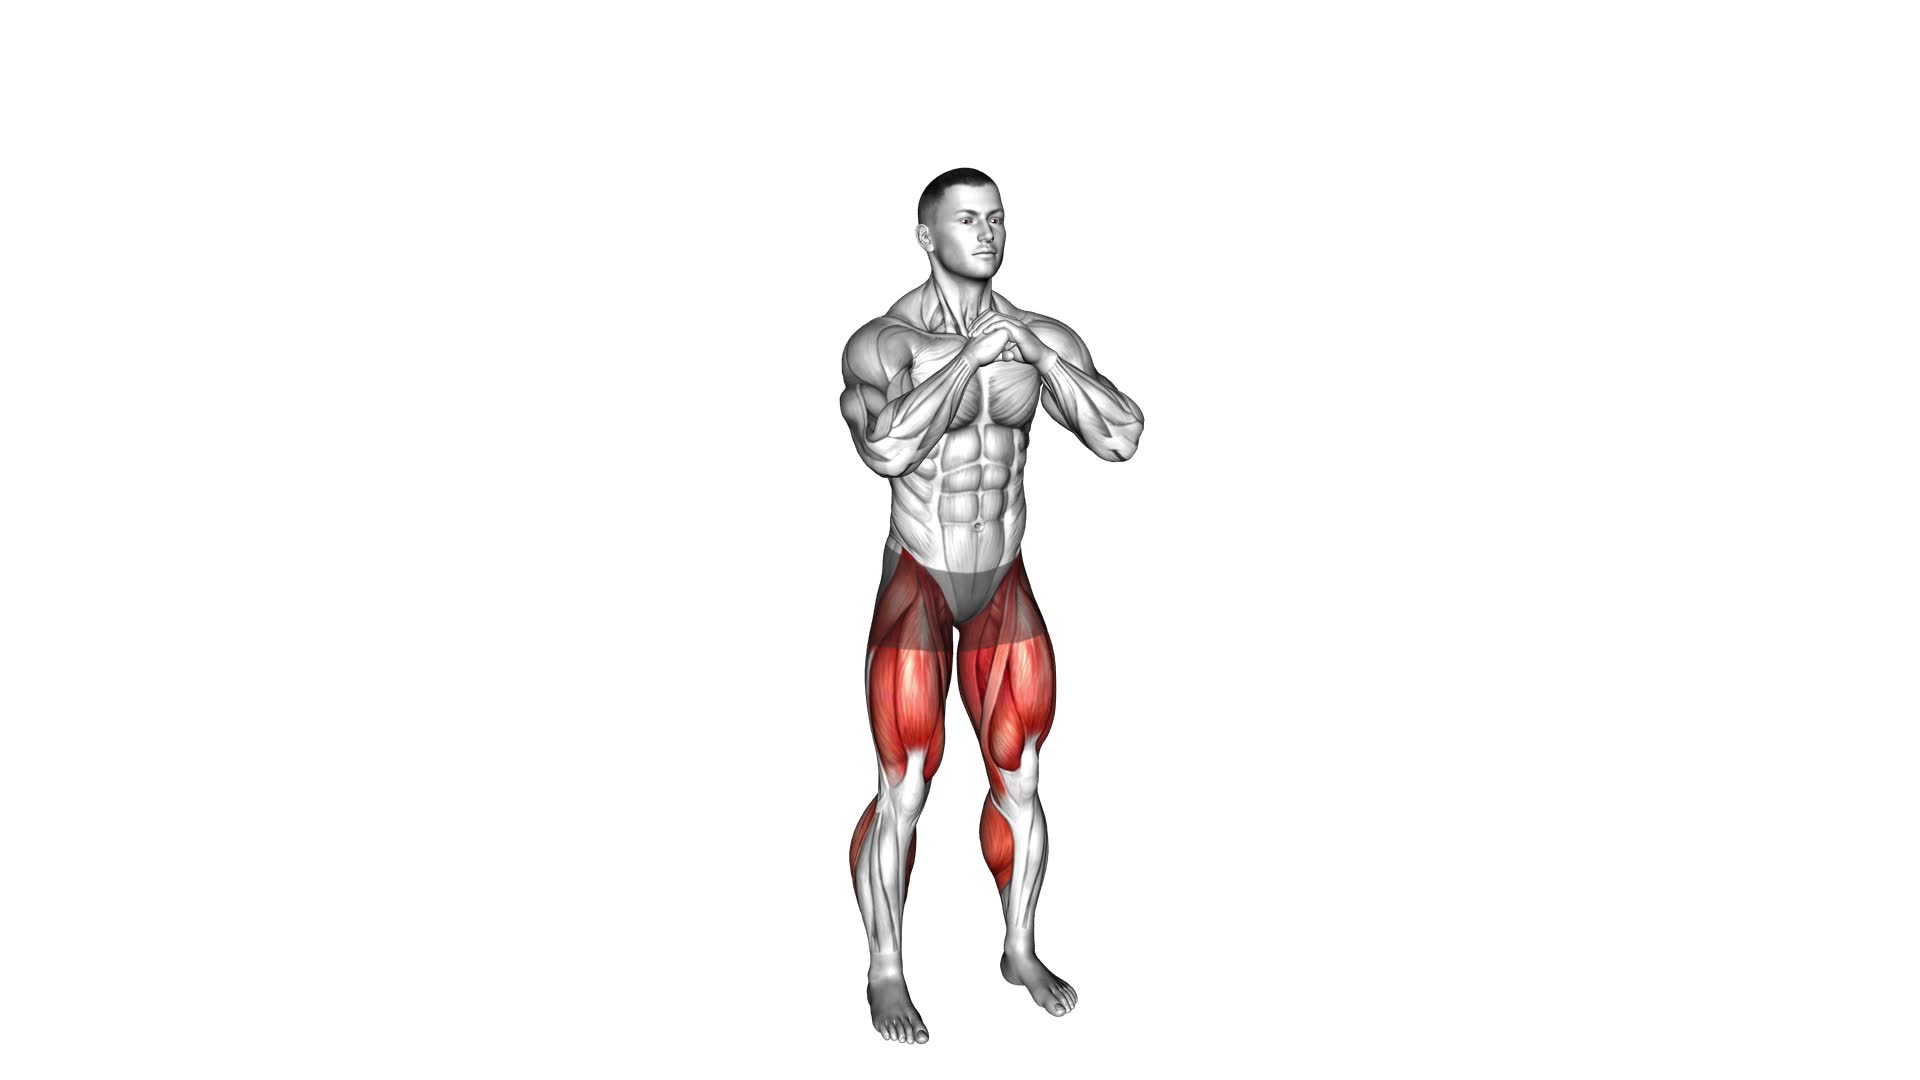 Wide Stance Jump Squat to Narrow Stance Jump Squat - Video Exercise Guide & Tips